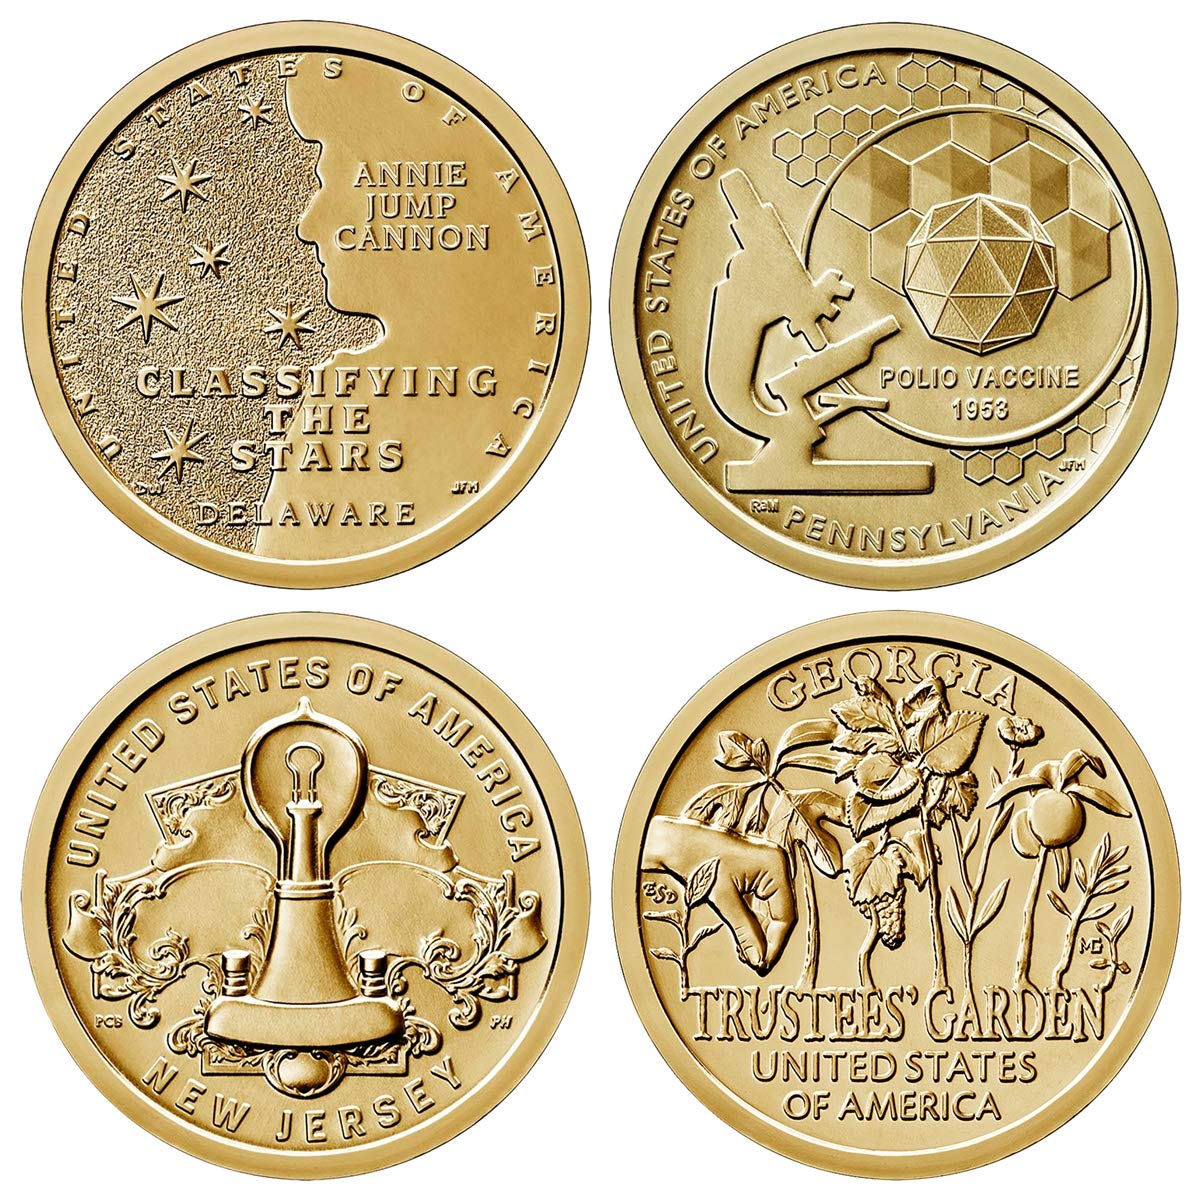 Value of United States of America Liberty One Dollar Coins